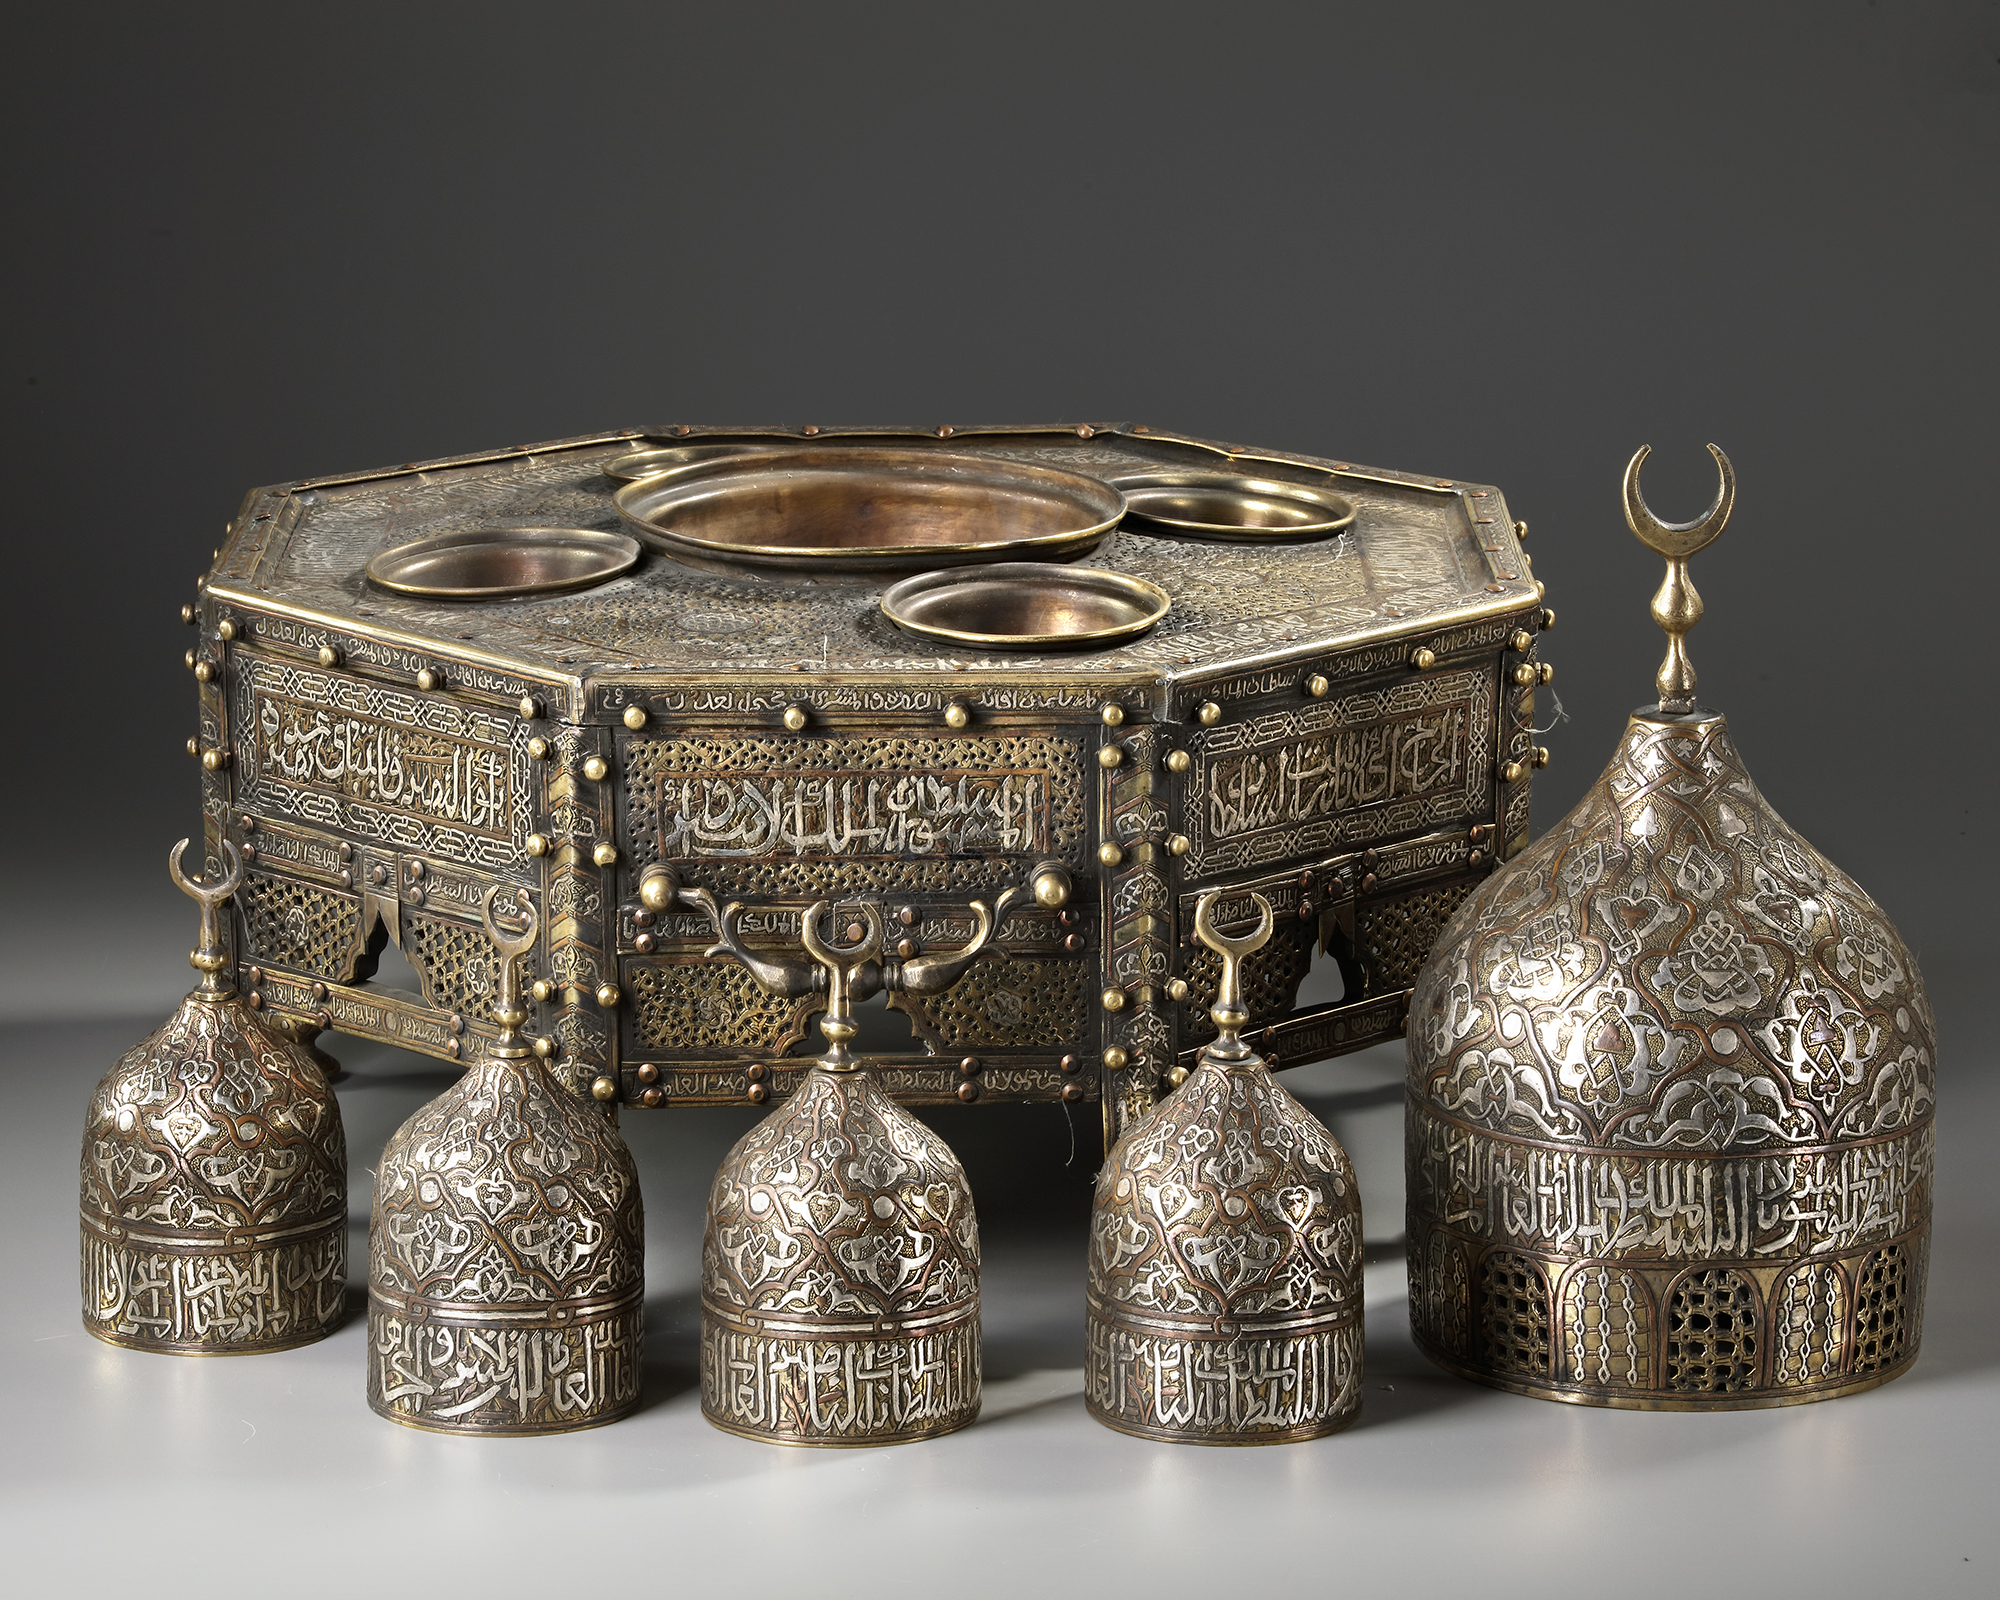 A LARGE MAMLUK REVIVAL SILVER INLAID BRASS DOMED INCENSE BURNER, EARLY 20TH CENTURY - Bild 4 aus 6